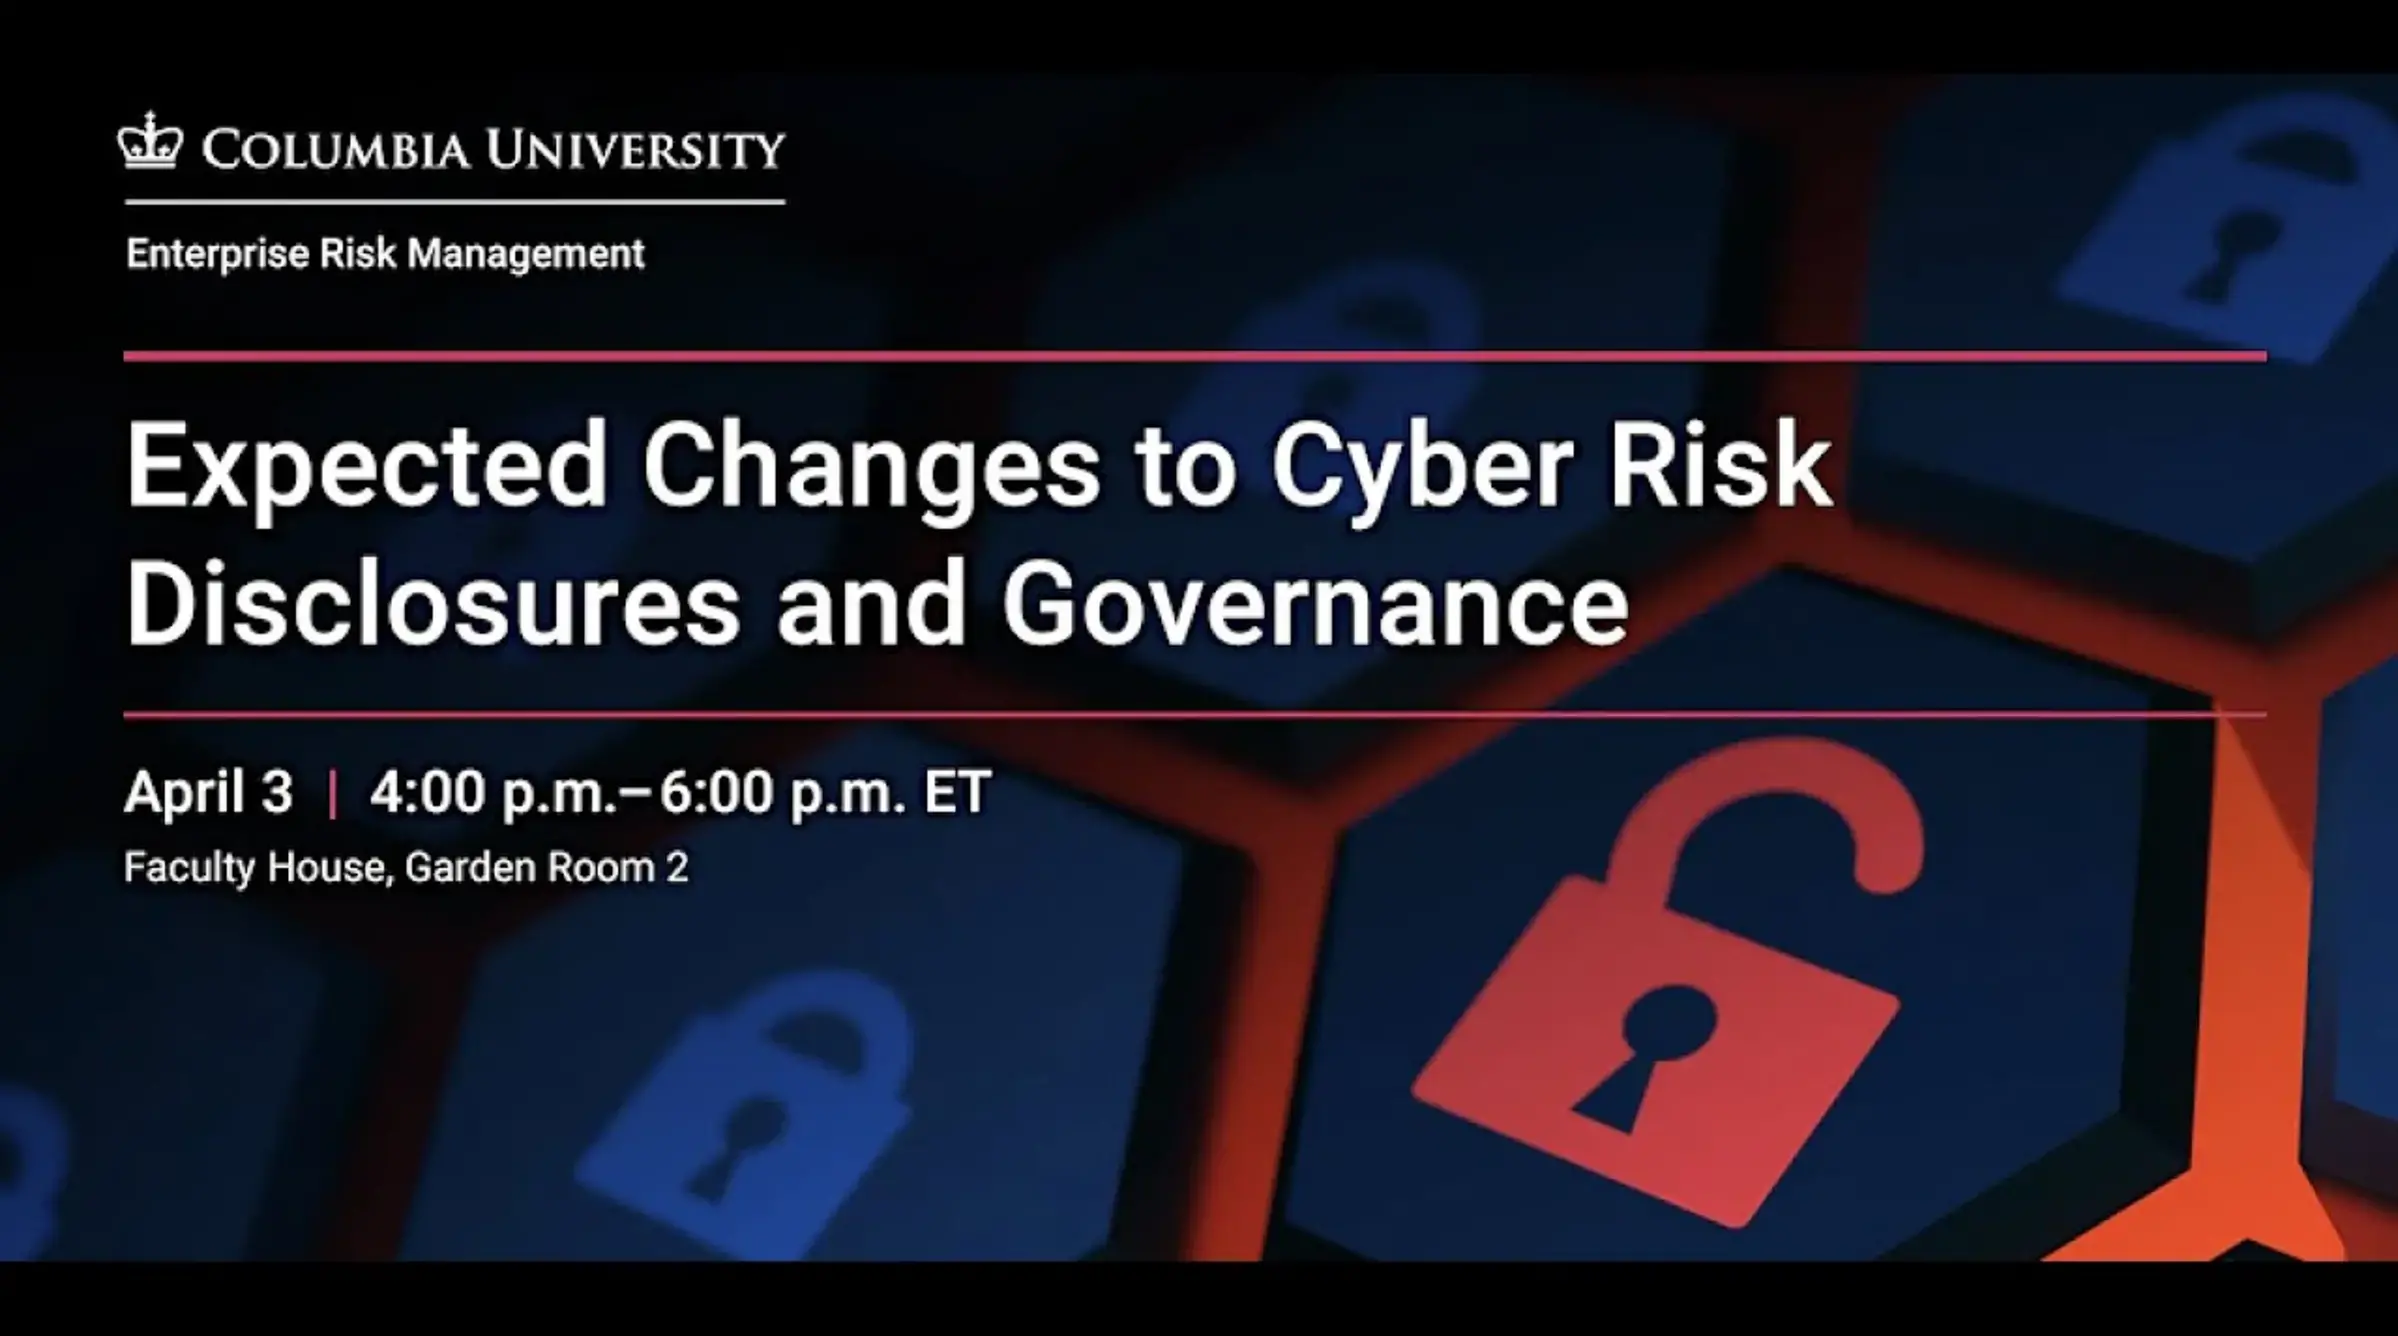 Expected Changes to Cyber Risk Disclosures and Governance